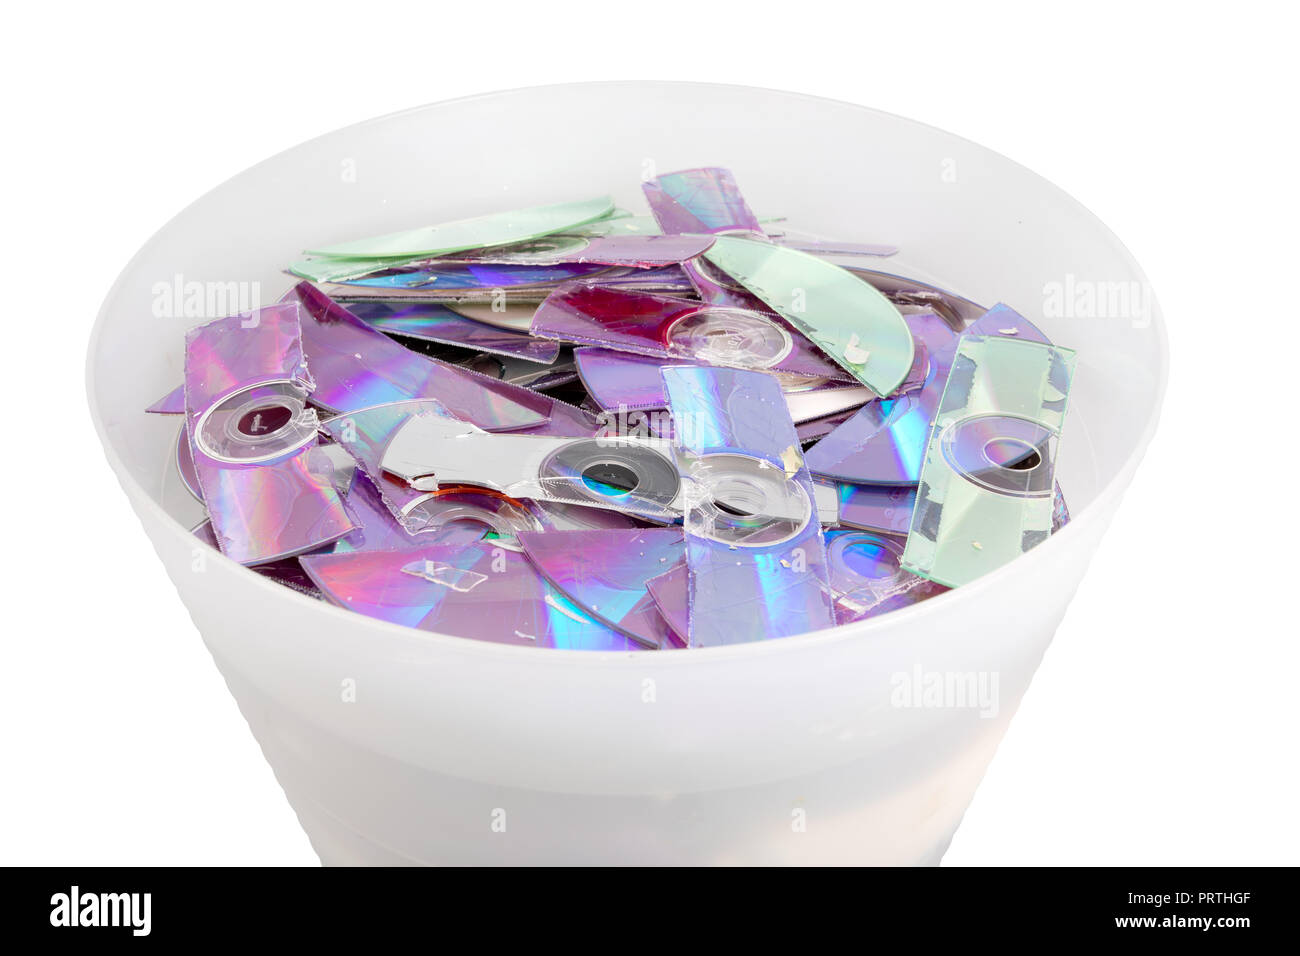 trash with stripes of shredded CD and DVD data disc destroyed by shredder Stock Photo